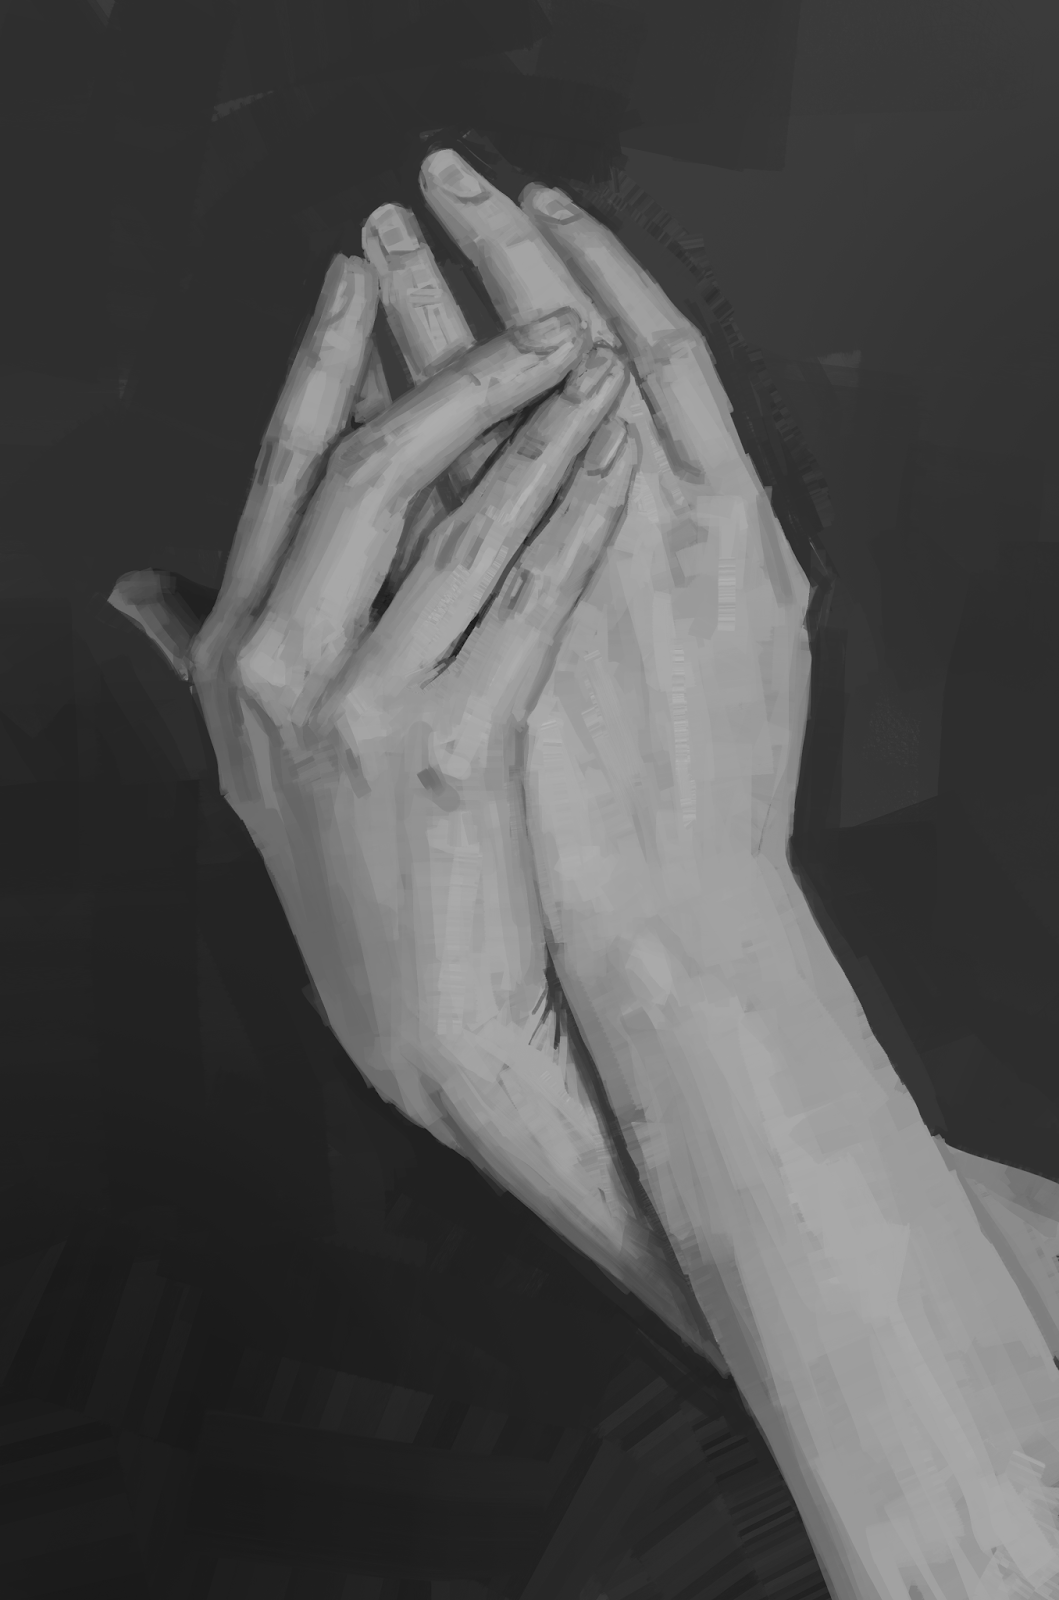 [Image: 2016_05_02_hand.PNG]